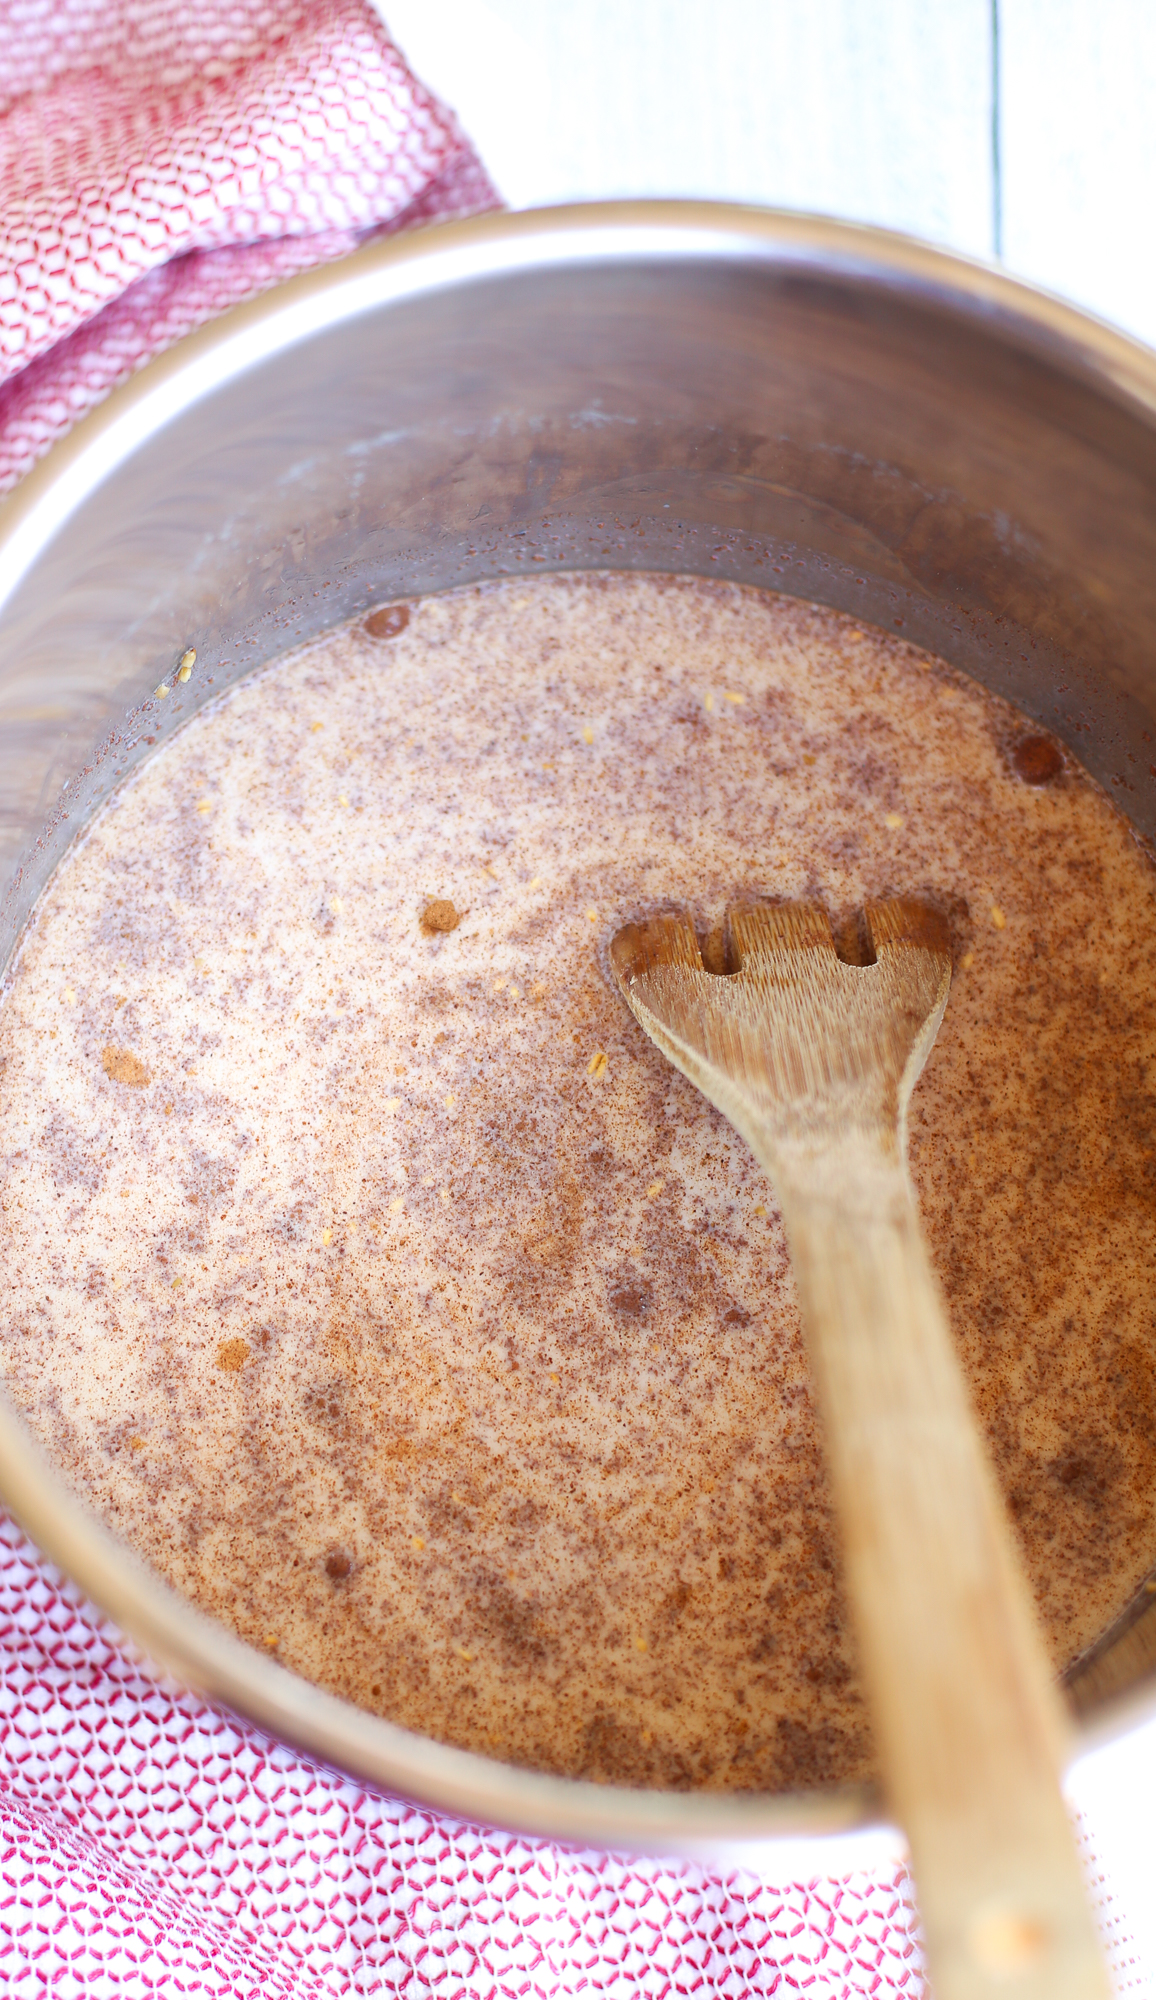 Stirring milk and other ingredients in an Instant Pot for brown sugar steel cut oats.